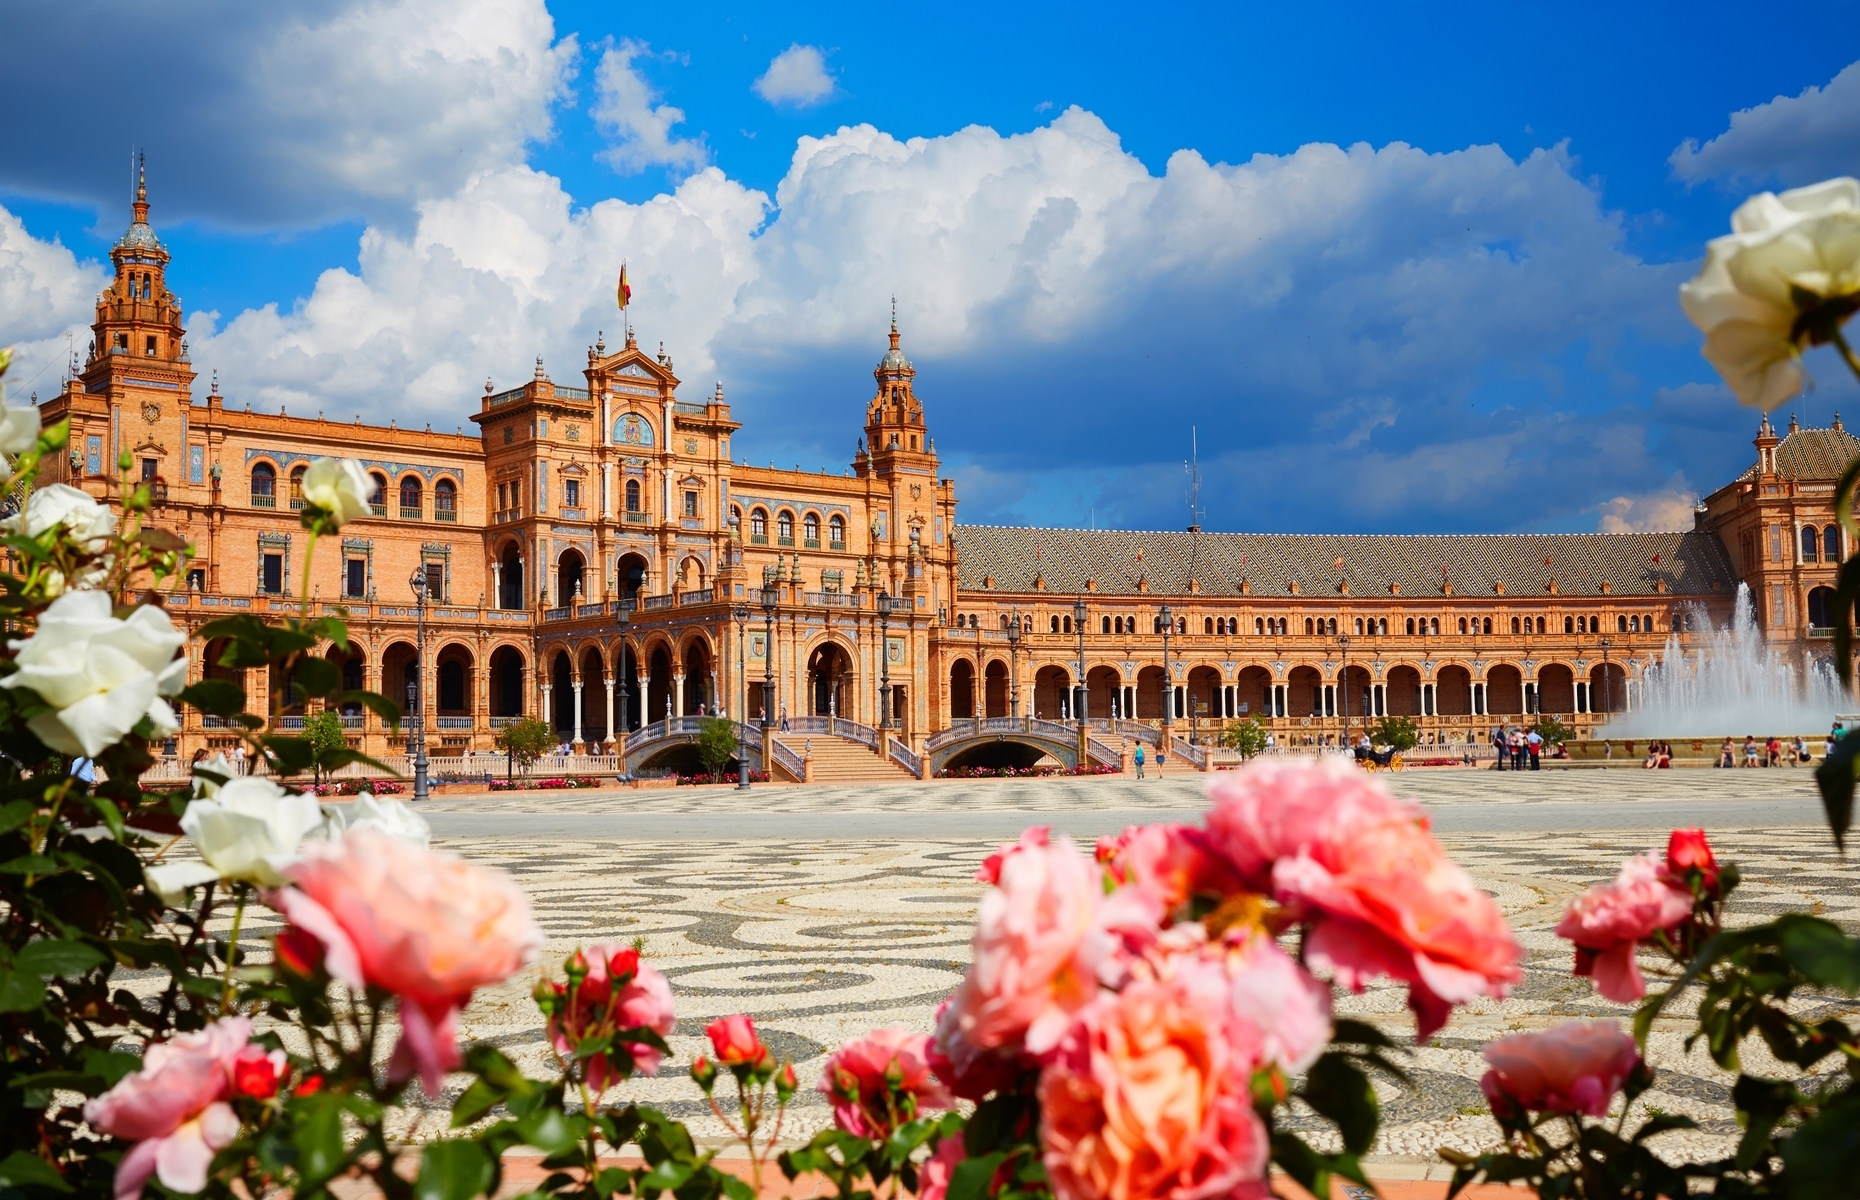 <p>The capital of Andalusia and the largest city in southern <a href="https://www.instagram.com/spain/" title="https://www.instagram.com/spain/">Spain</a>, Seville is famous for its Moorish buildings, flamenco dancing, and fascinating history. It’s home to not one, but three UNESCO World Heritage Sites, including the impressive Catedral de Sevilla, the largest Gothic building in the world. Other must-see wonders include the picturesque <a href="https://www.spain.info/en/places-of-interest/plaza-espana-sevilla/" title="https://www.spain.info/en/places-of-interest/plaza-espana-sevilla/">Plaza de España</a>, the Setas de Sevilla (the largest wooden structure in the world), and the Real Maestranza, the oldest bullring in the world. With over <a href="https://visitsouthernspain.com/best-tapas-in-seville/">3,000 tapas bars</a> across the city, it’s the only way to dine out.</p>